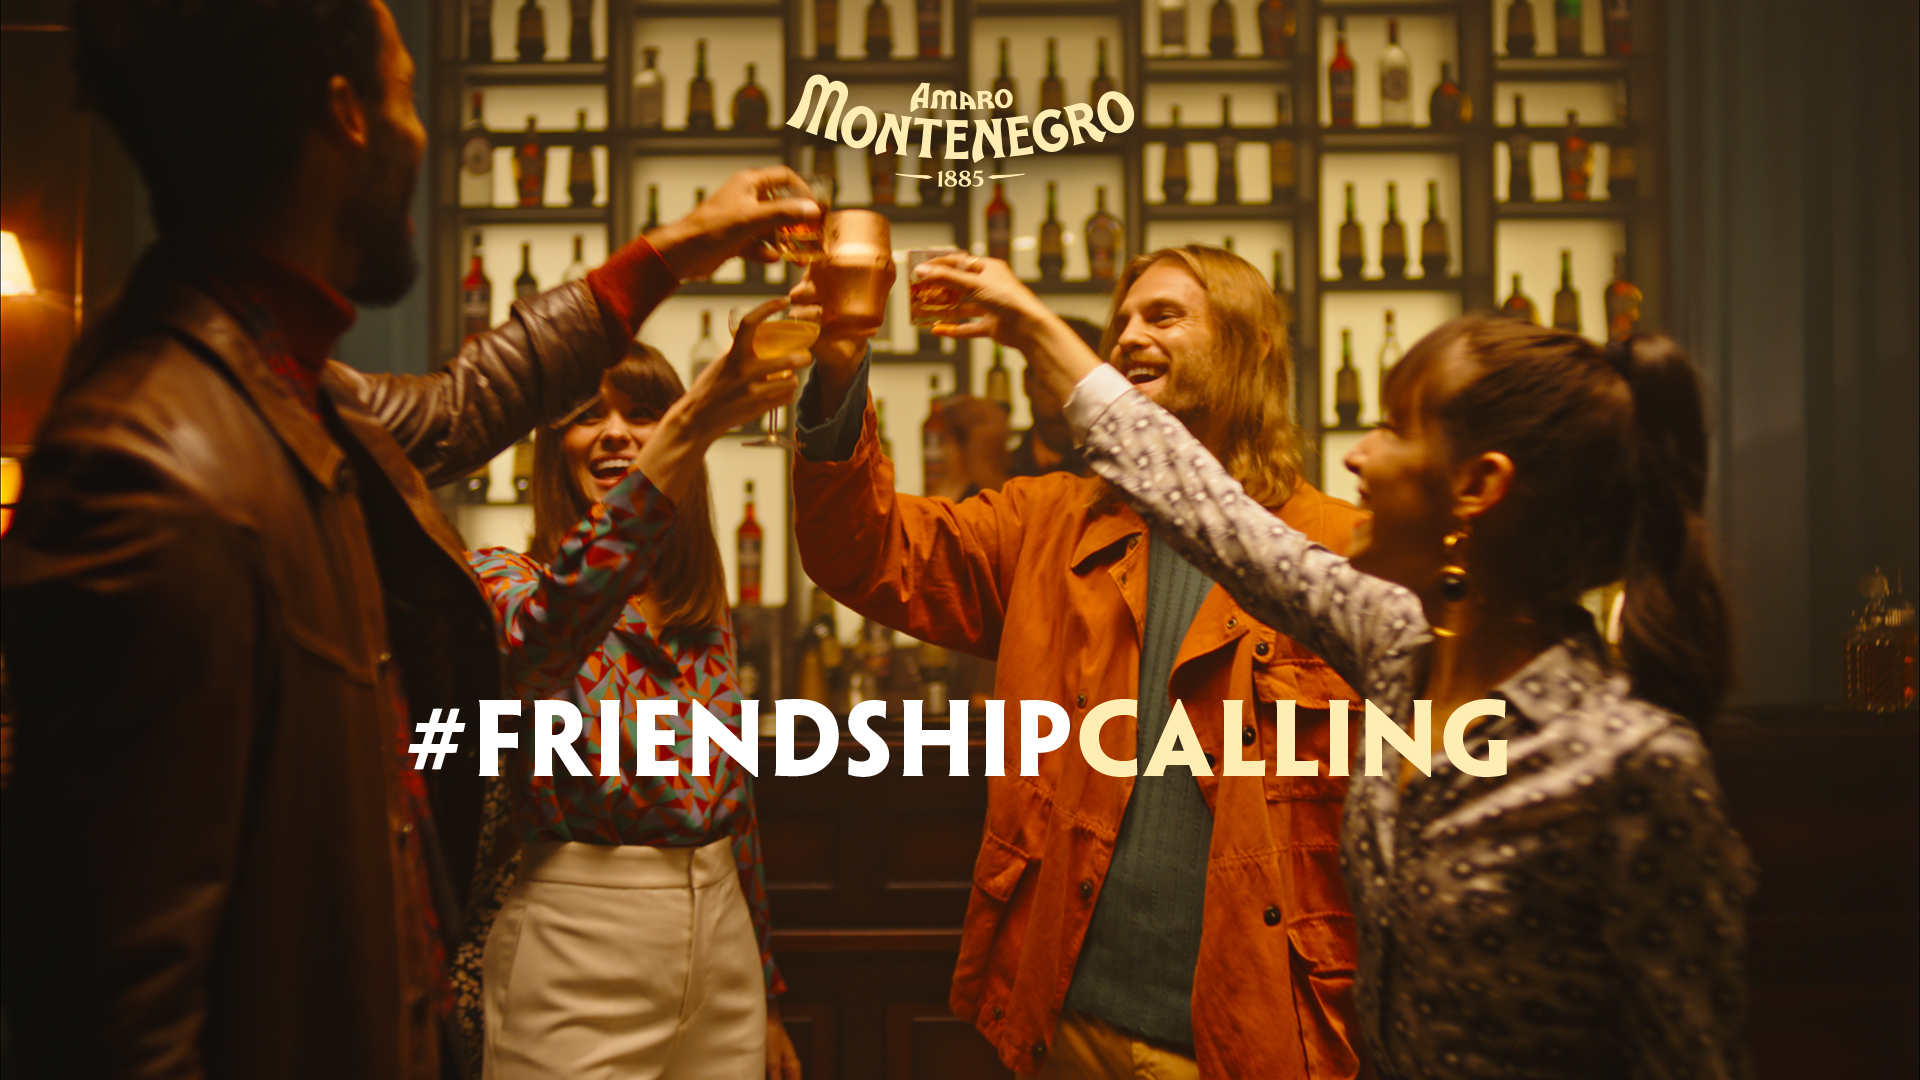 Amaro Montenegro launches the campaign “Friendship Calling”. The new integrated campaign created by Armando Testa, celebrates the “true flavor” of friendship